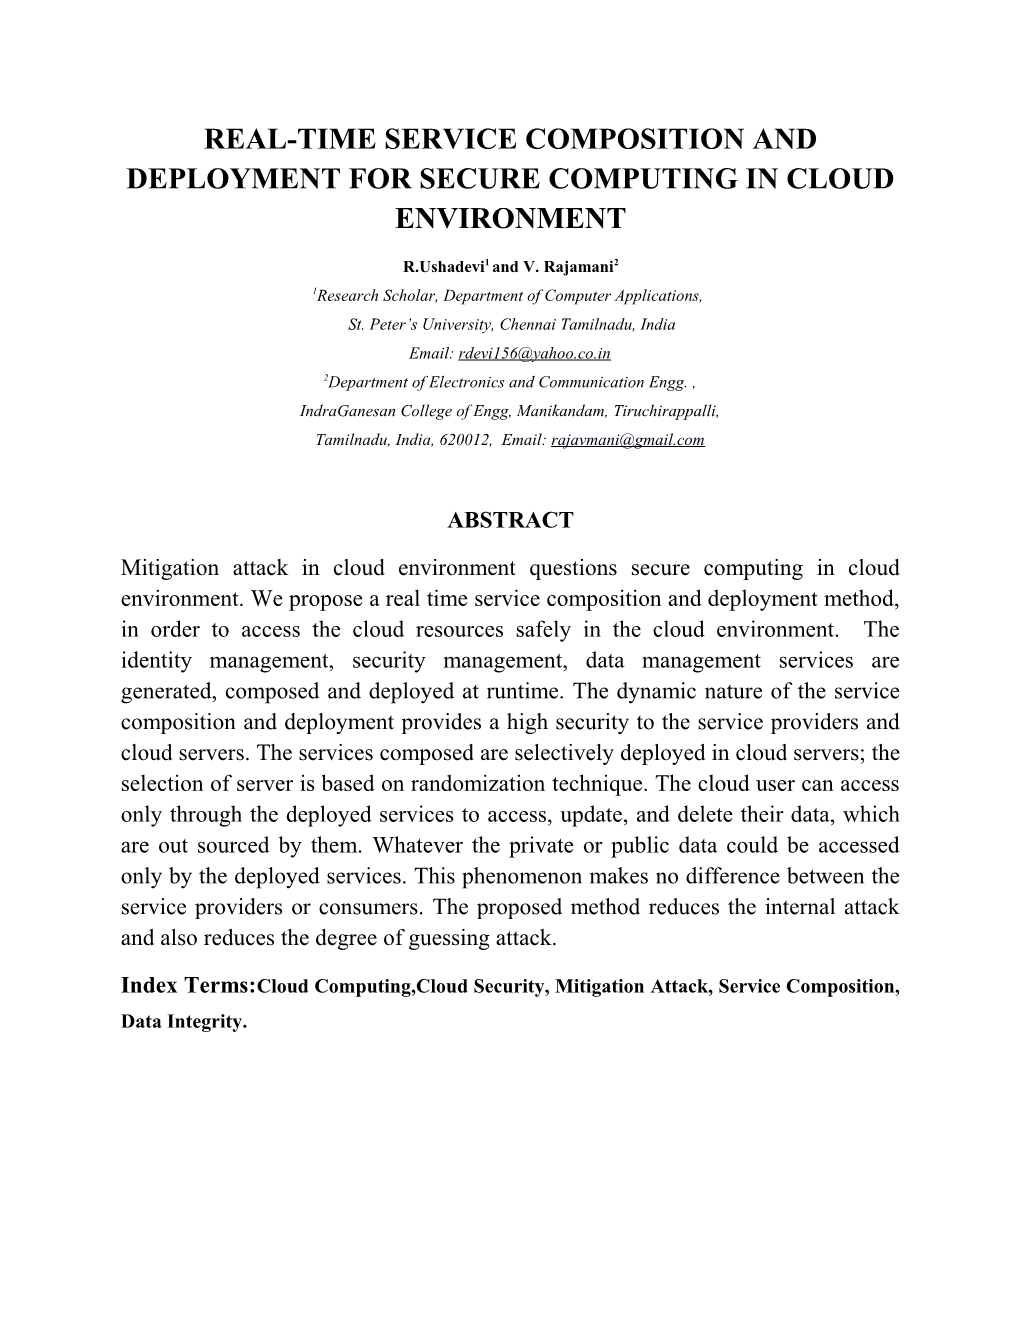 Real-Time Service Composition and Deployment for Secure Computing in Cloud Environment